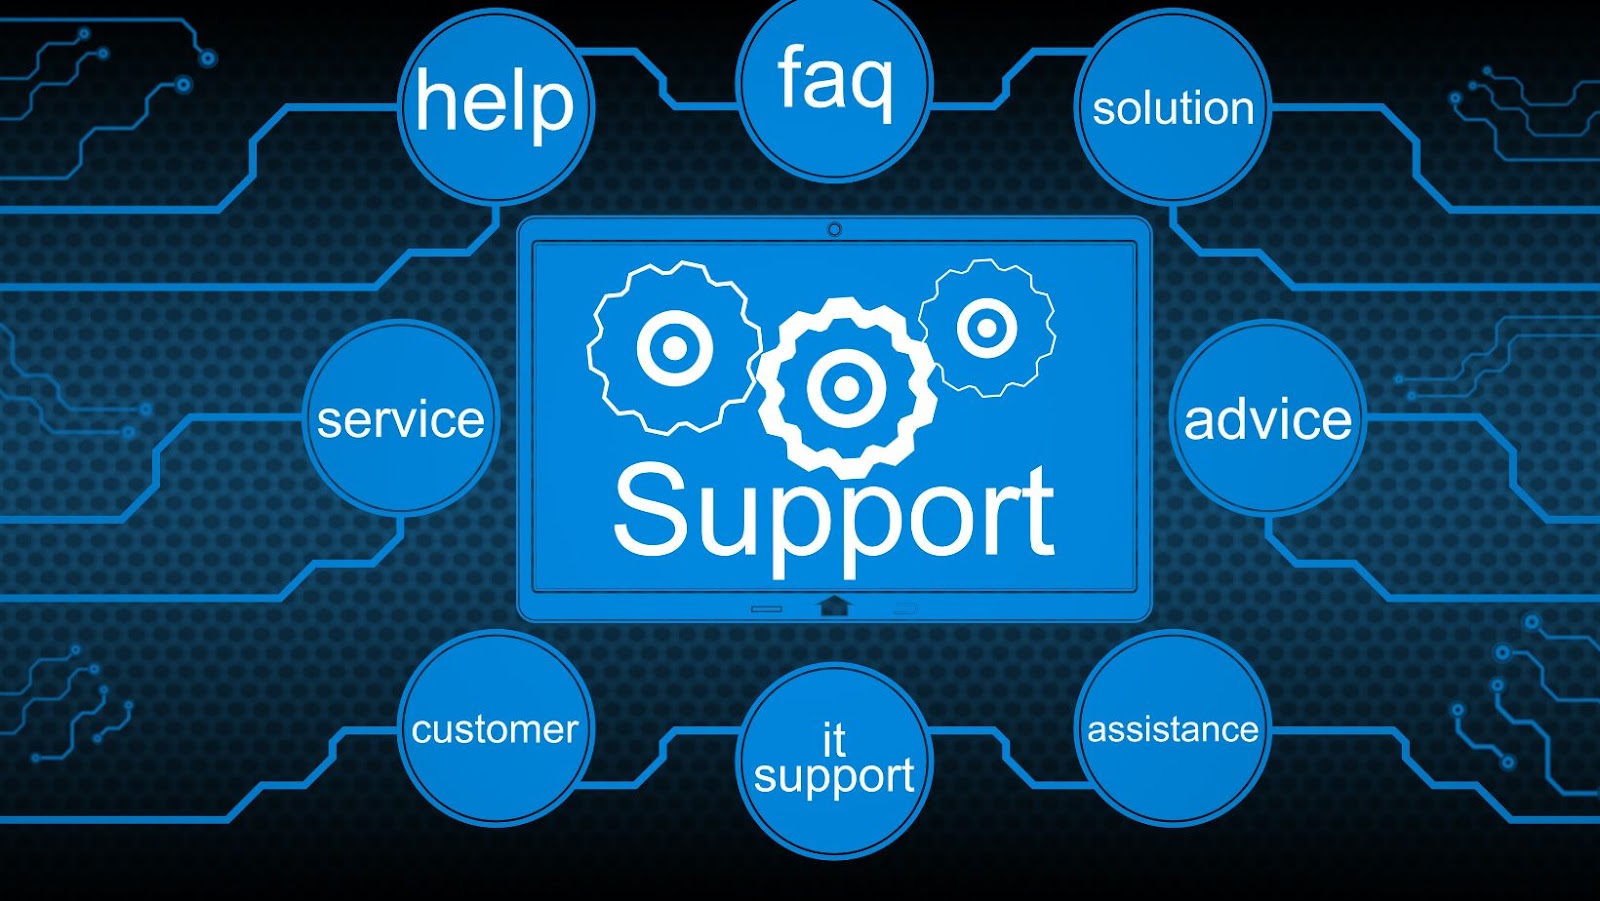 Supports время. It support. It поддержка. Поддержка support. It support logo.